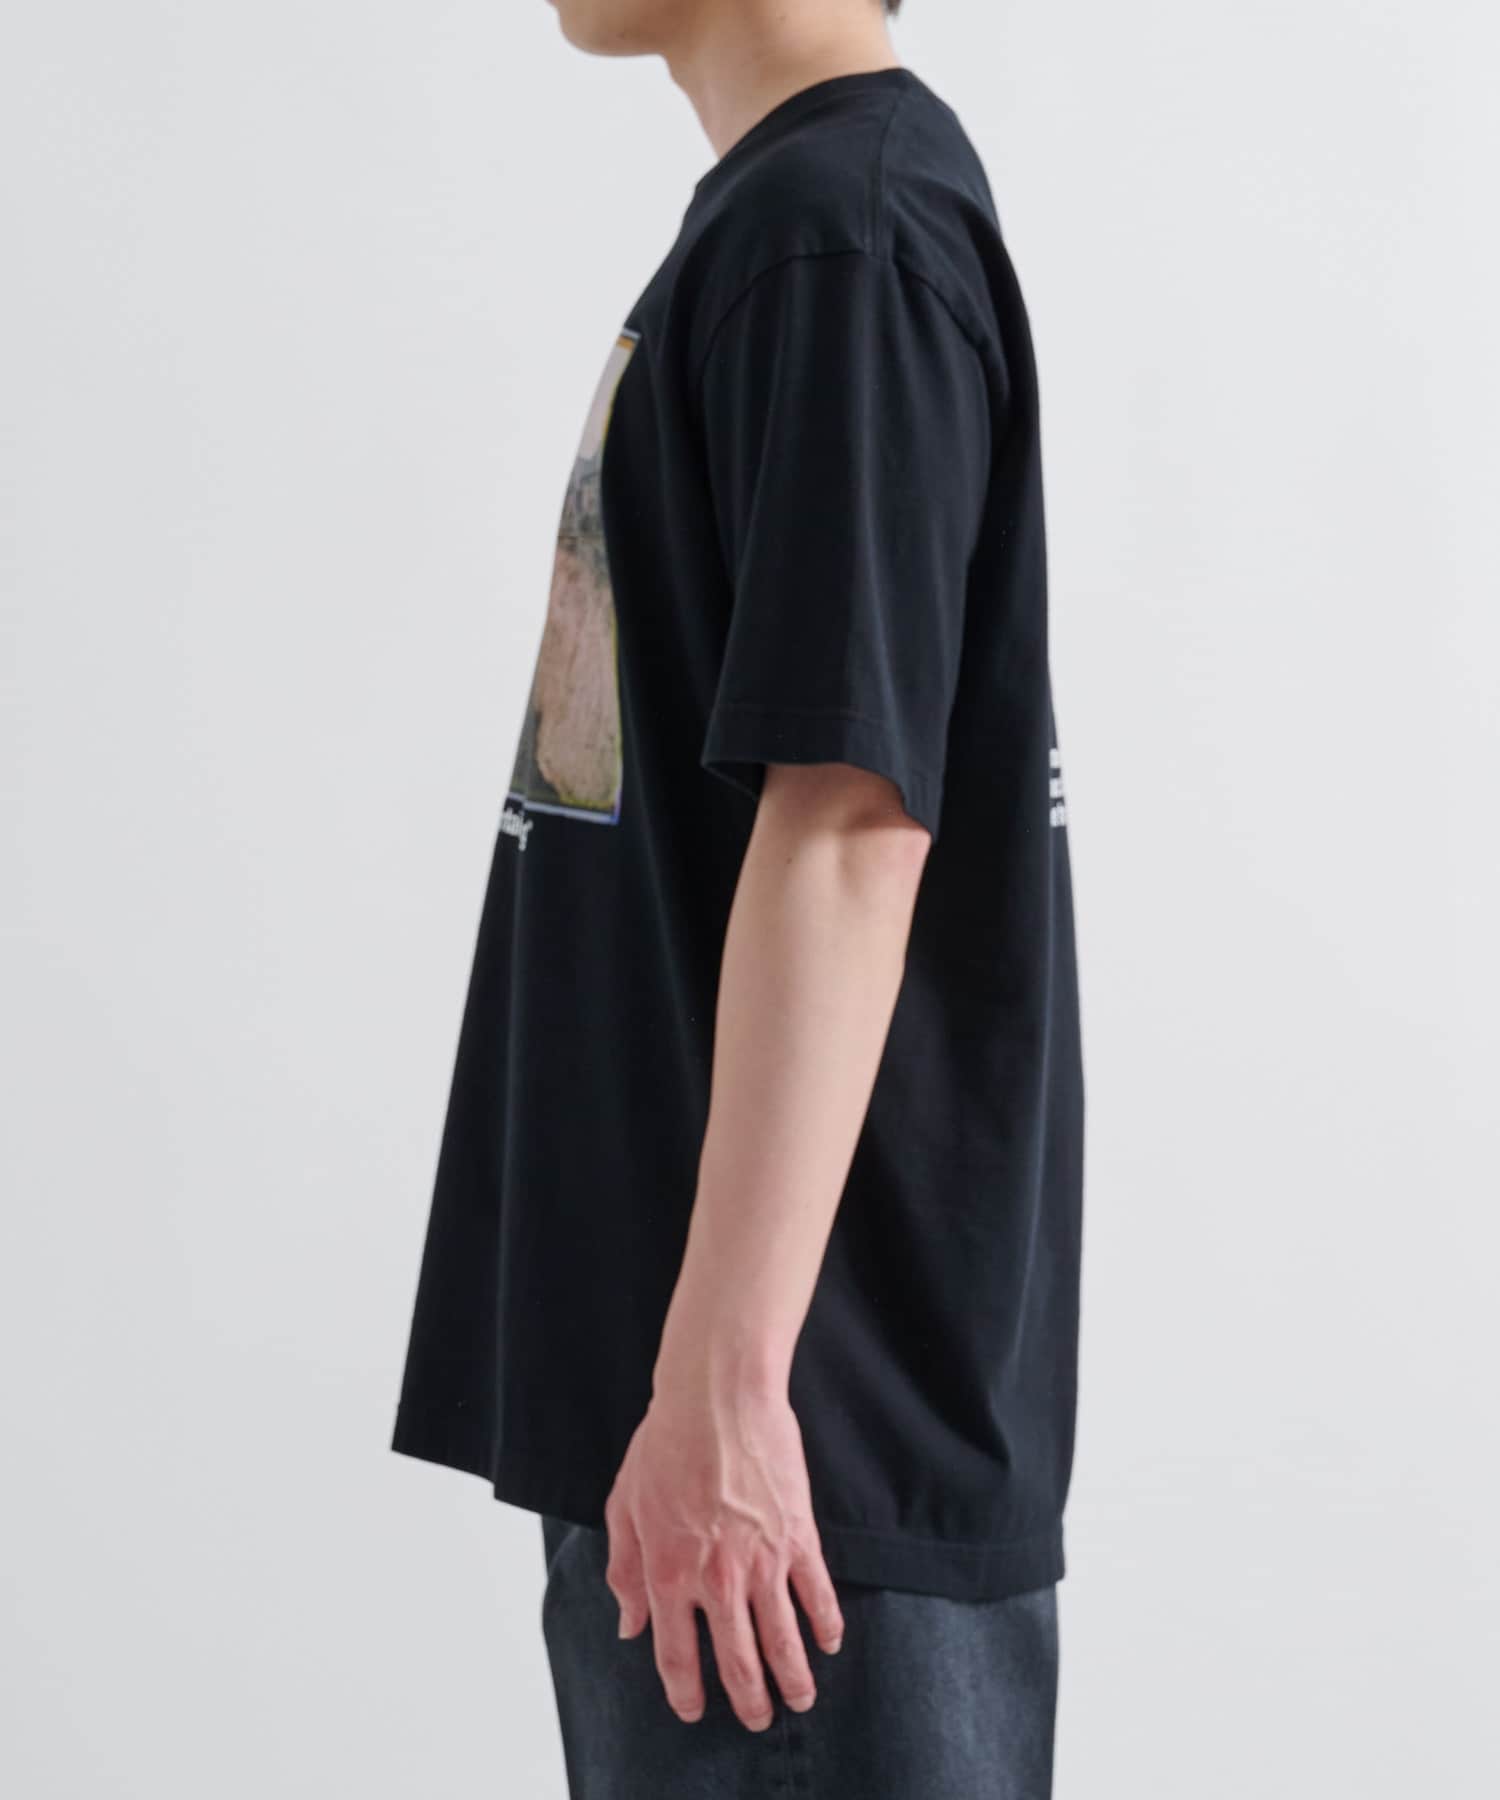 SEVEN SISTERS PHOTO T-SHIRT White Mountaineering